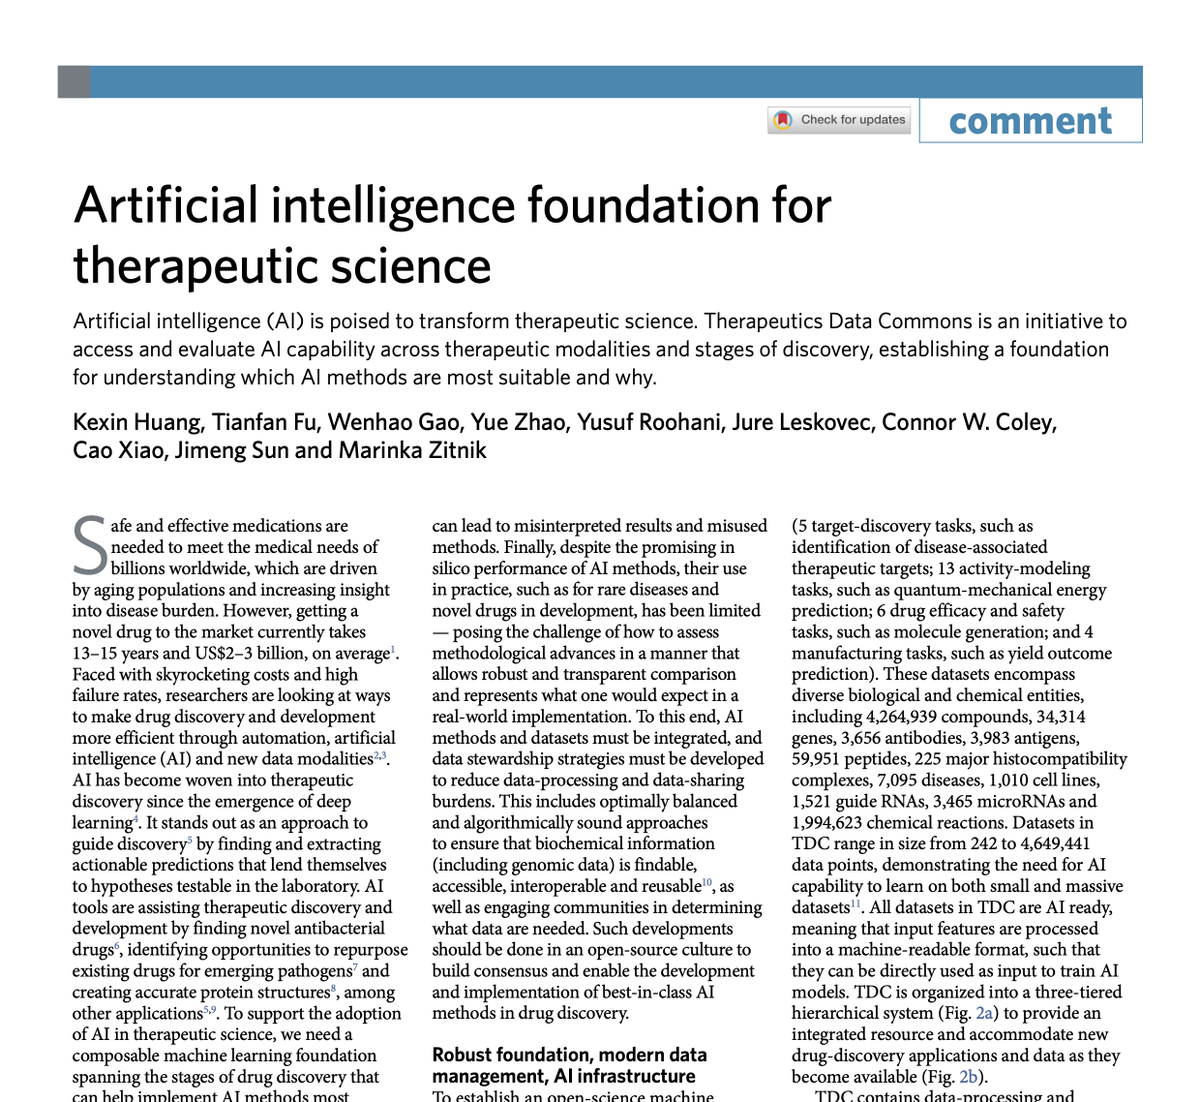 Excited to share our new paper in Nature Chemical Biology @nchembio AI is poised to transform #therapeutic #science The Commons is an initiative to access and evaluate #AI capability across therapeutic modalities and stages of discovery 1/4 nature.com/articles/s4158…